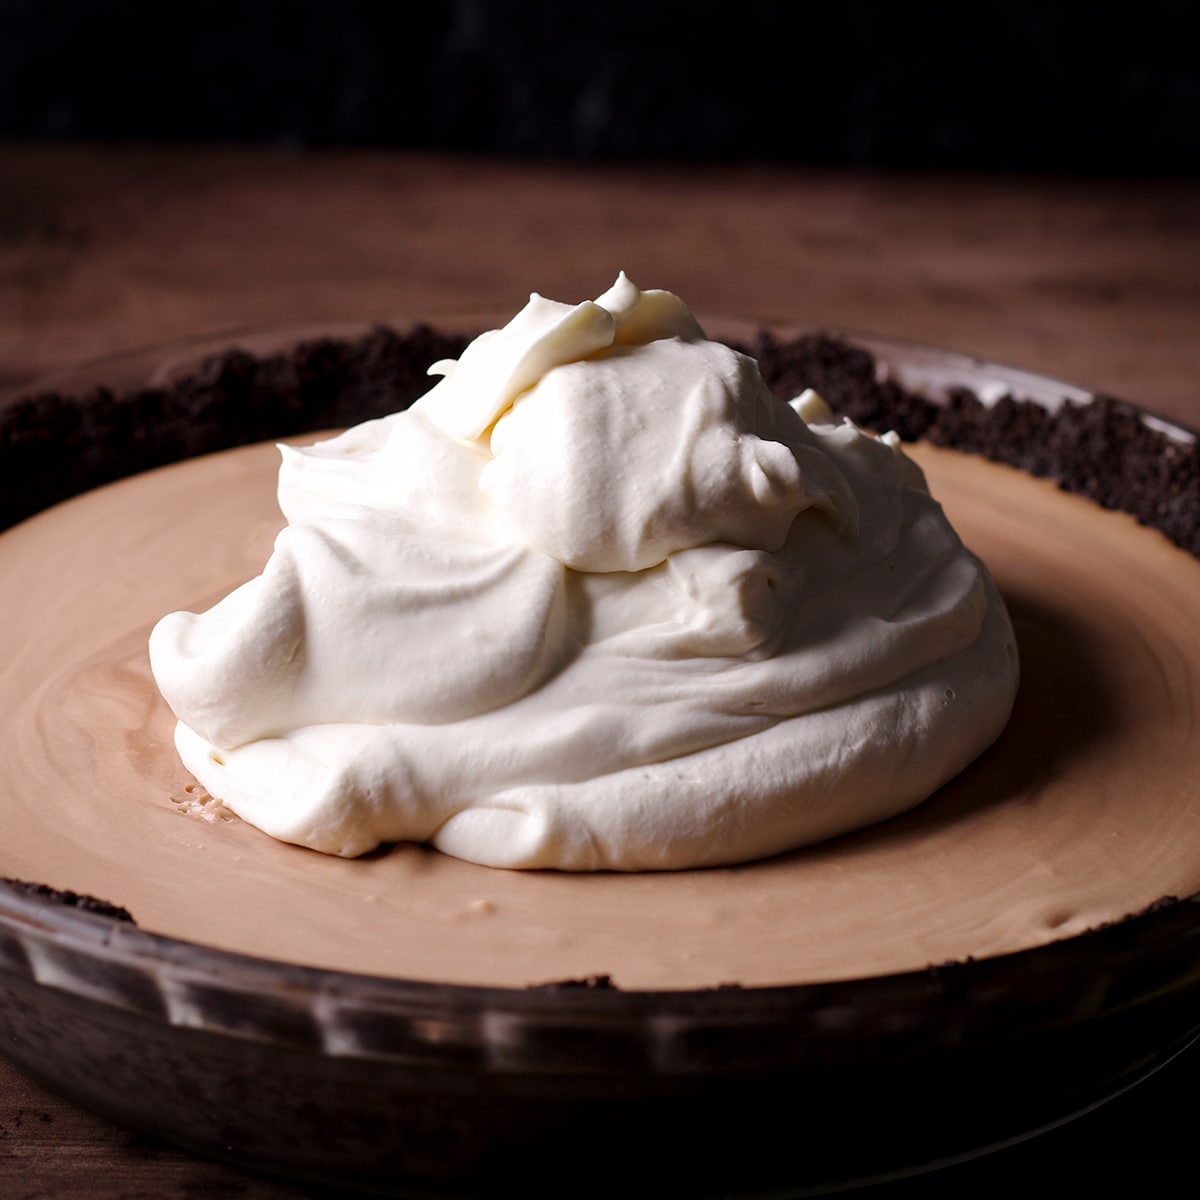 A large dollop of whipped cream onto of a chocolate mousse pie with an Oreo cookie crust.